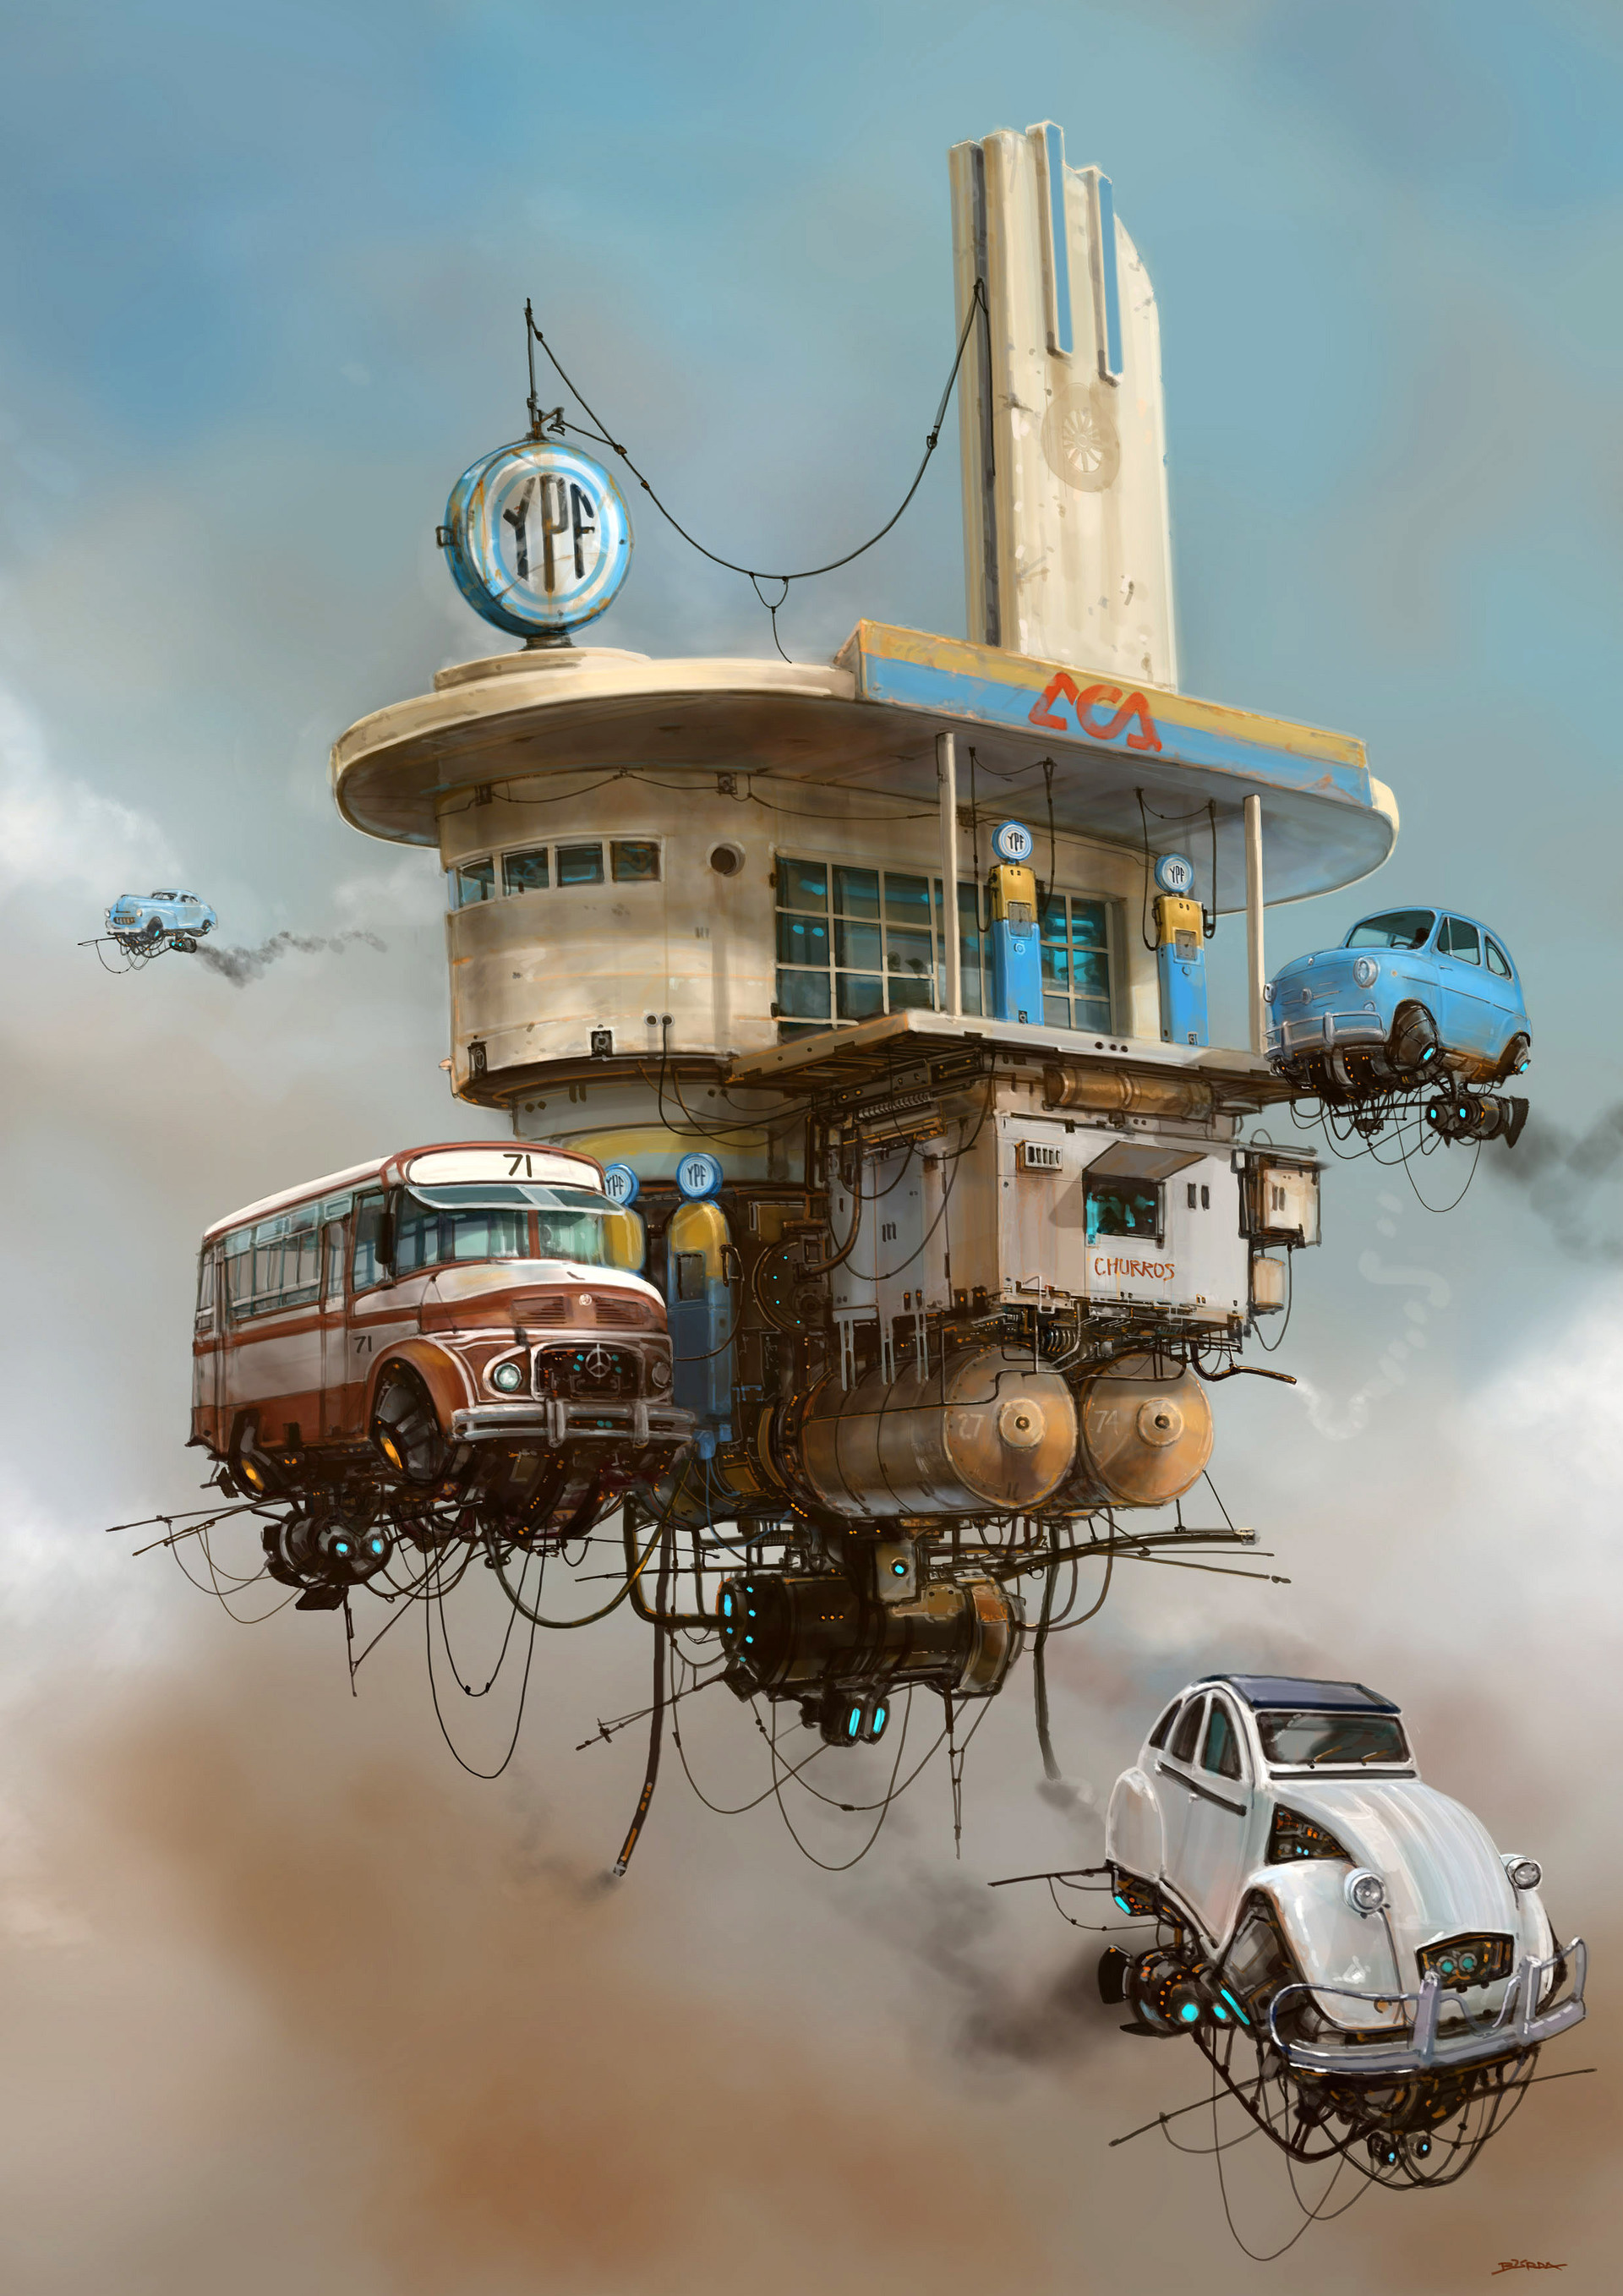 sci fi, art, auto, ssi fi, fiction, that's incredible, sky, building